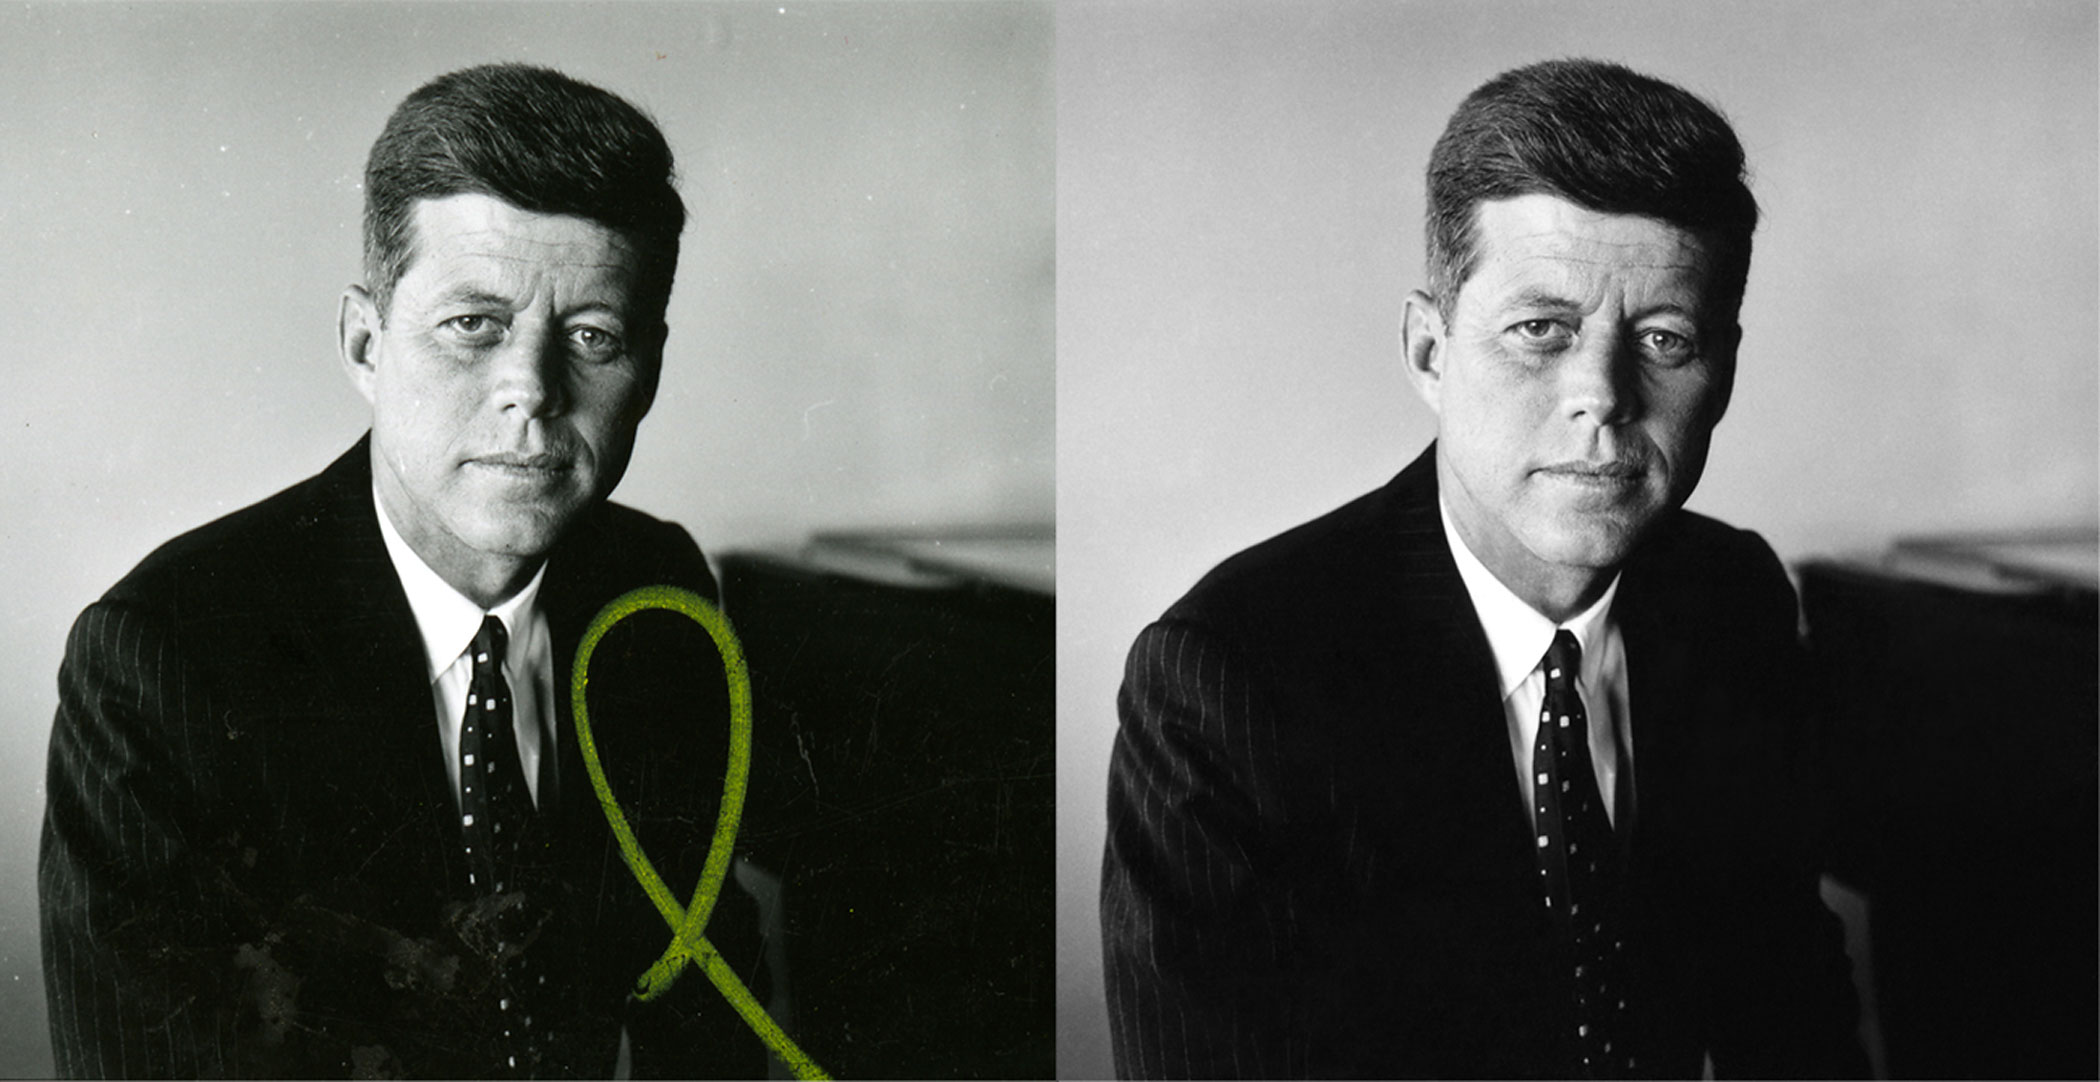 This is Jacques Lowe’s first portrait of John F. Kennedy, made during one of Kennedy’s rare days off from his 1958 Senate re-election campaign. To restore this image for the Newseum’s “Creating Camelot” exhibit, the image was cleaned, the tone adjusted and the yellow mark removed.